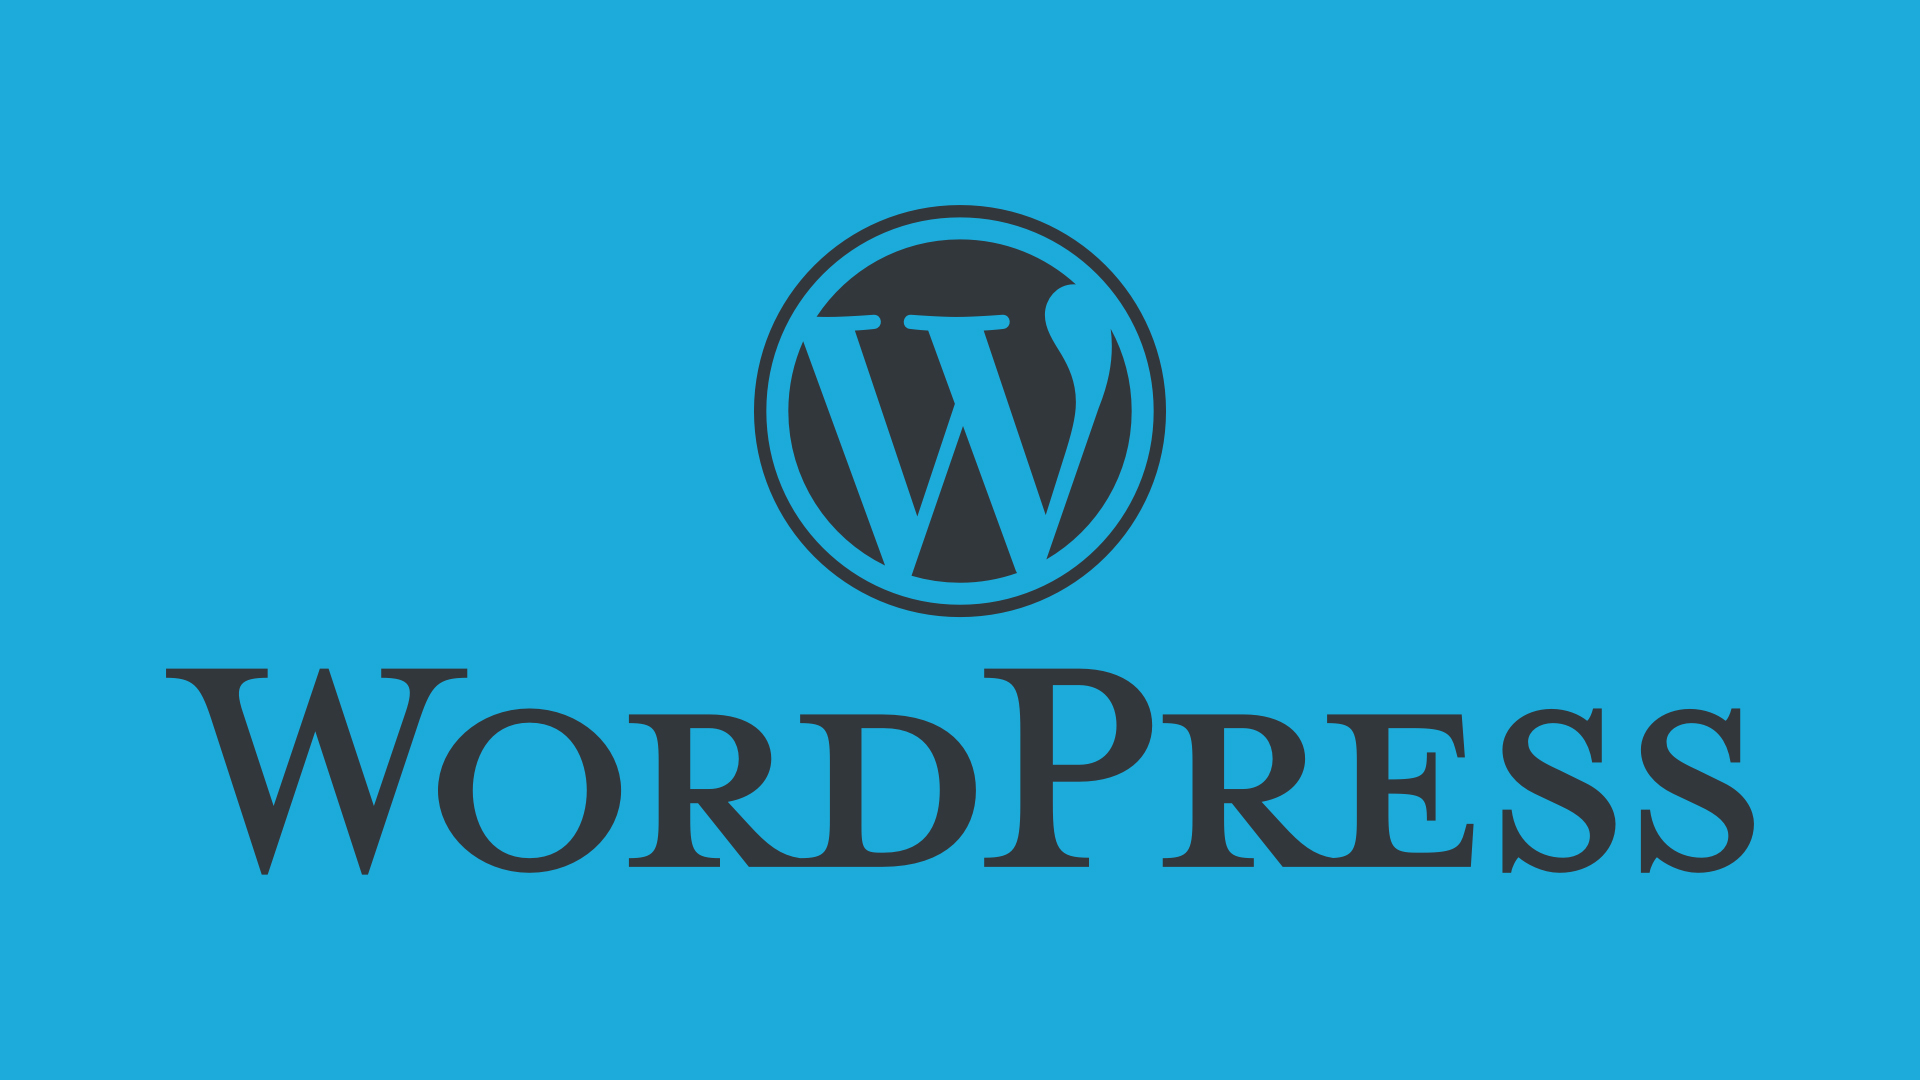 WordPress Tips, Tricks, And Advice Straight From The Experts